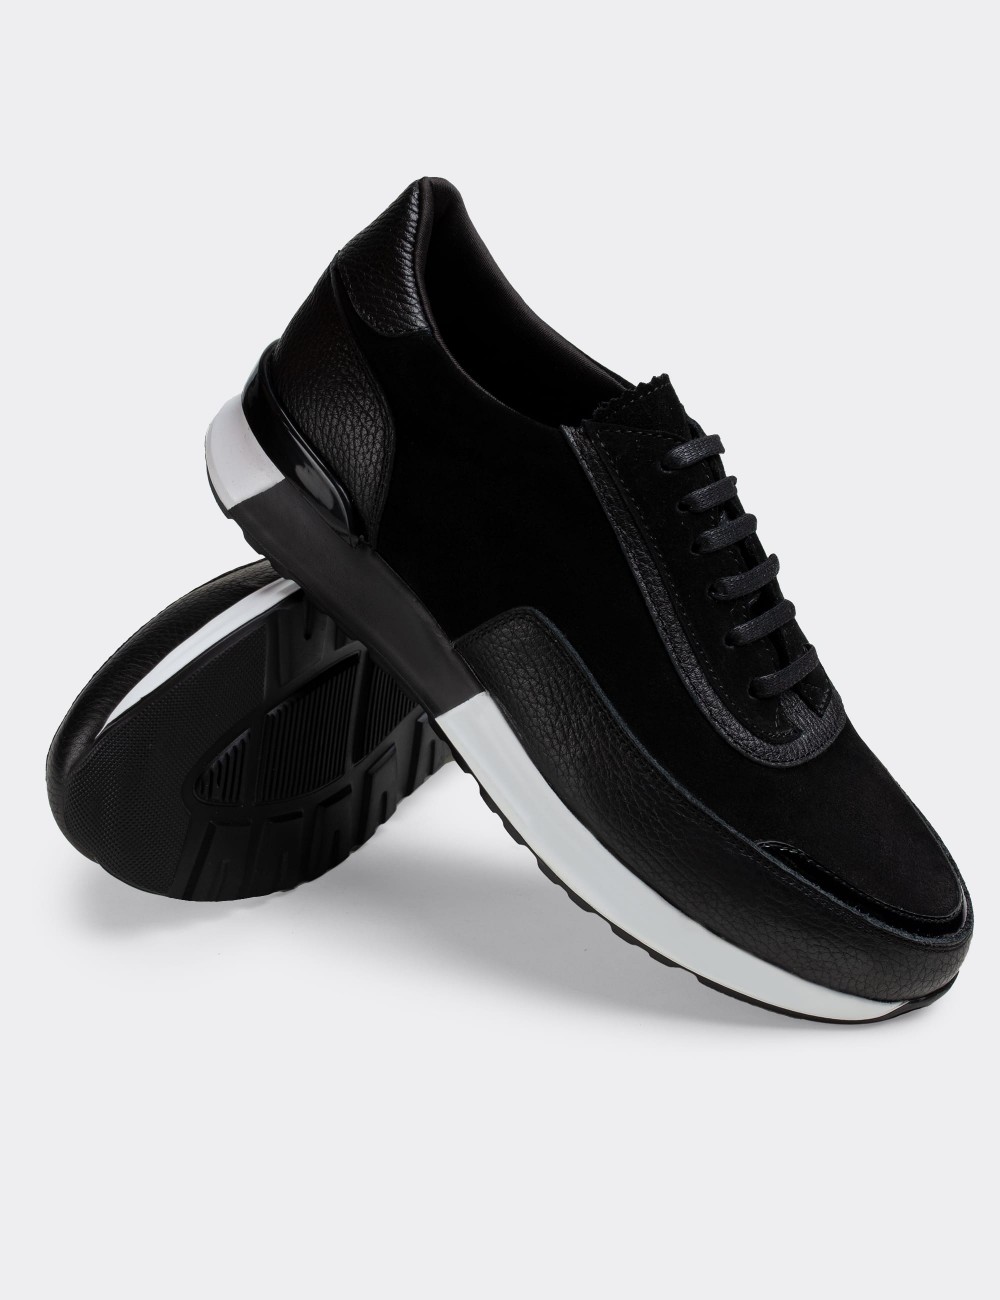 Black Suede Leather Sneakers - 01819MSYHE02